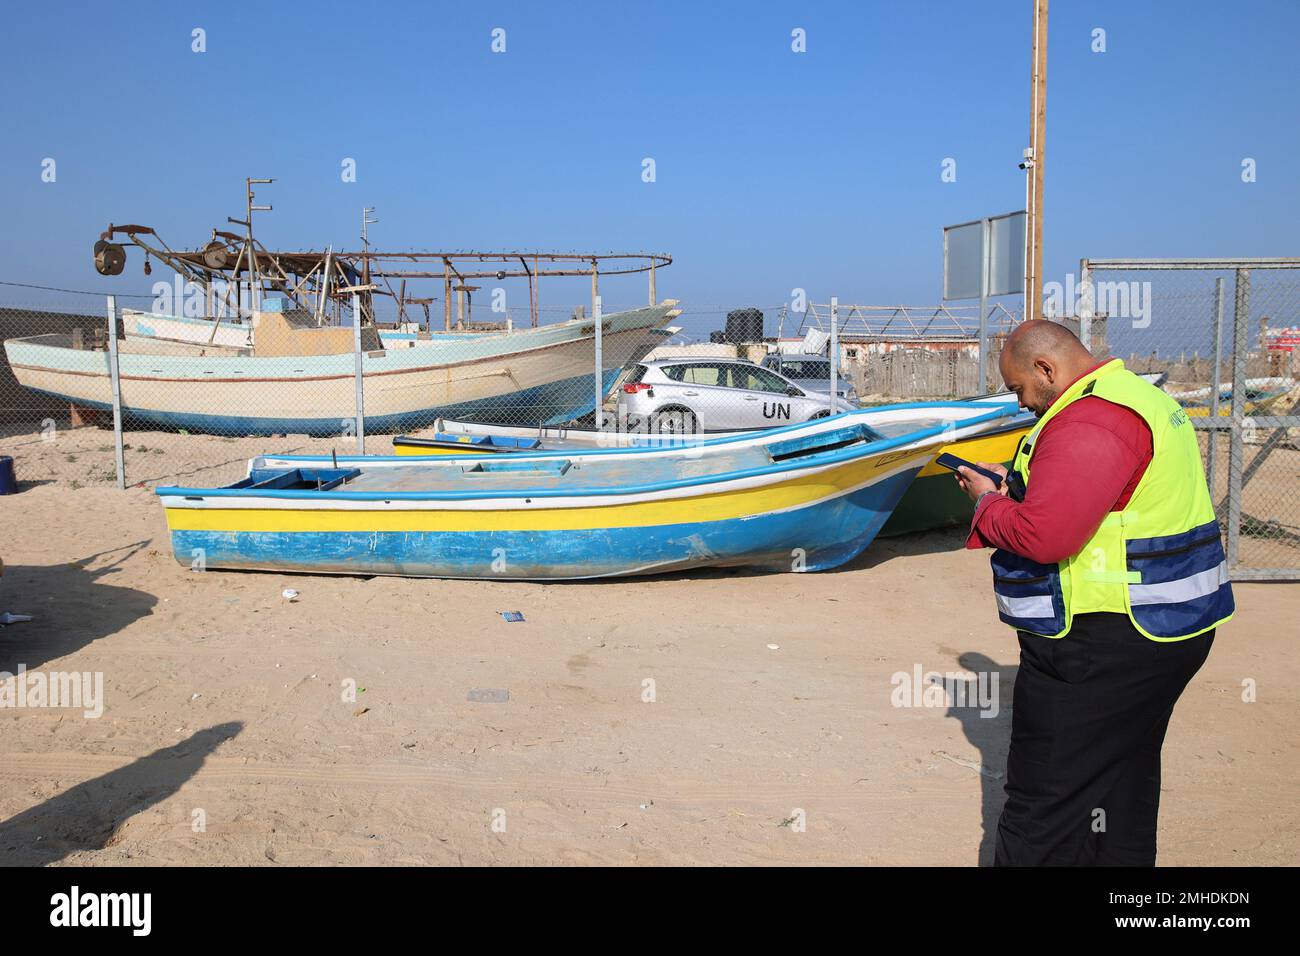 Gaza, Palestine. 26th Jan, 2023. A UN employee stands near a fishing boat after installing a new engine on it in the Gaza seaport in Gaza City. In the last week, permitted the import of 12 outboard engines, said the United Nations. Israel had previously barred their entry based on concern they could prove 'dual use'. The repairs are taking place at an U.N.-supervised workshop on the beach, near the so-called 'Boat Graveyard' where dozens of rusty vessels have been piled up, abandoned after breakdowns. Credit: SOPA Images Limited/Alamy Live News Stock Photo